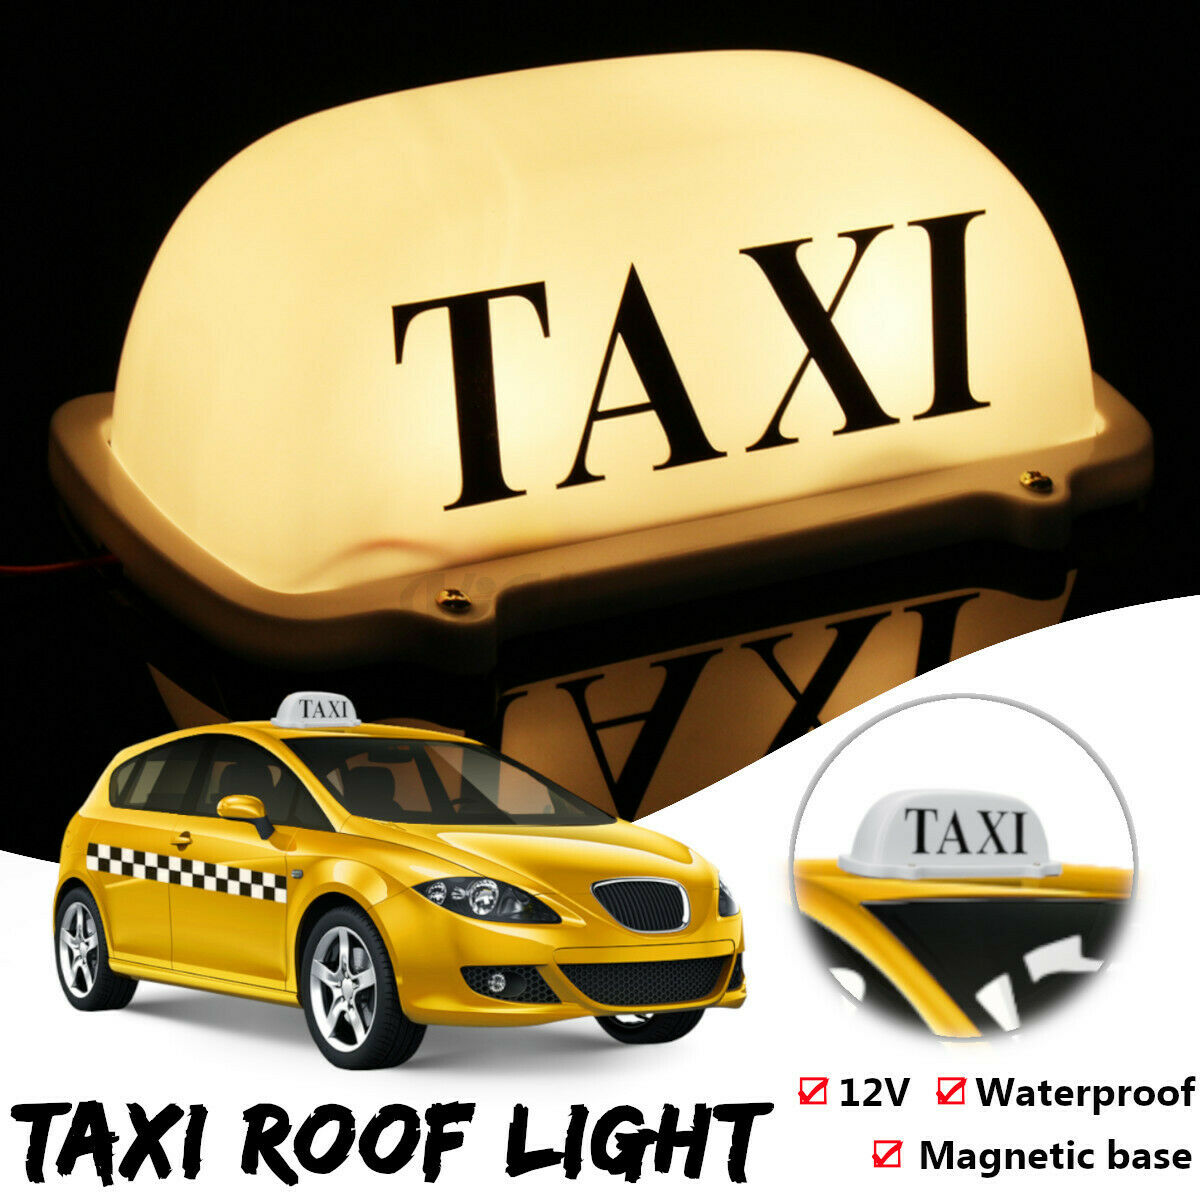 DC 12V Light Magnetic Base Waterproof Taxi Roof Top Car Cab LED Sign Lamp for taxi driver hot sale